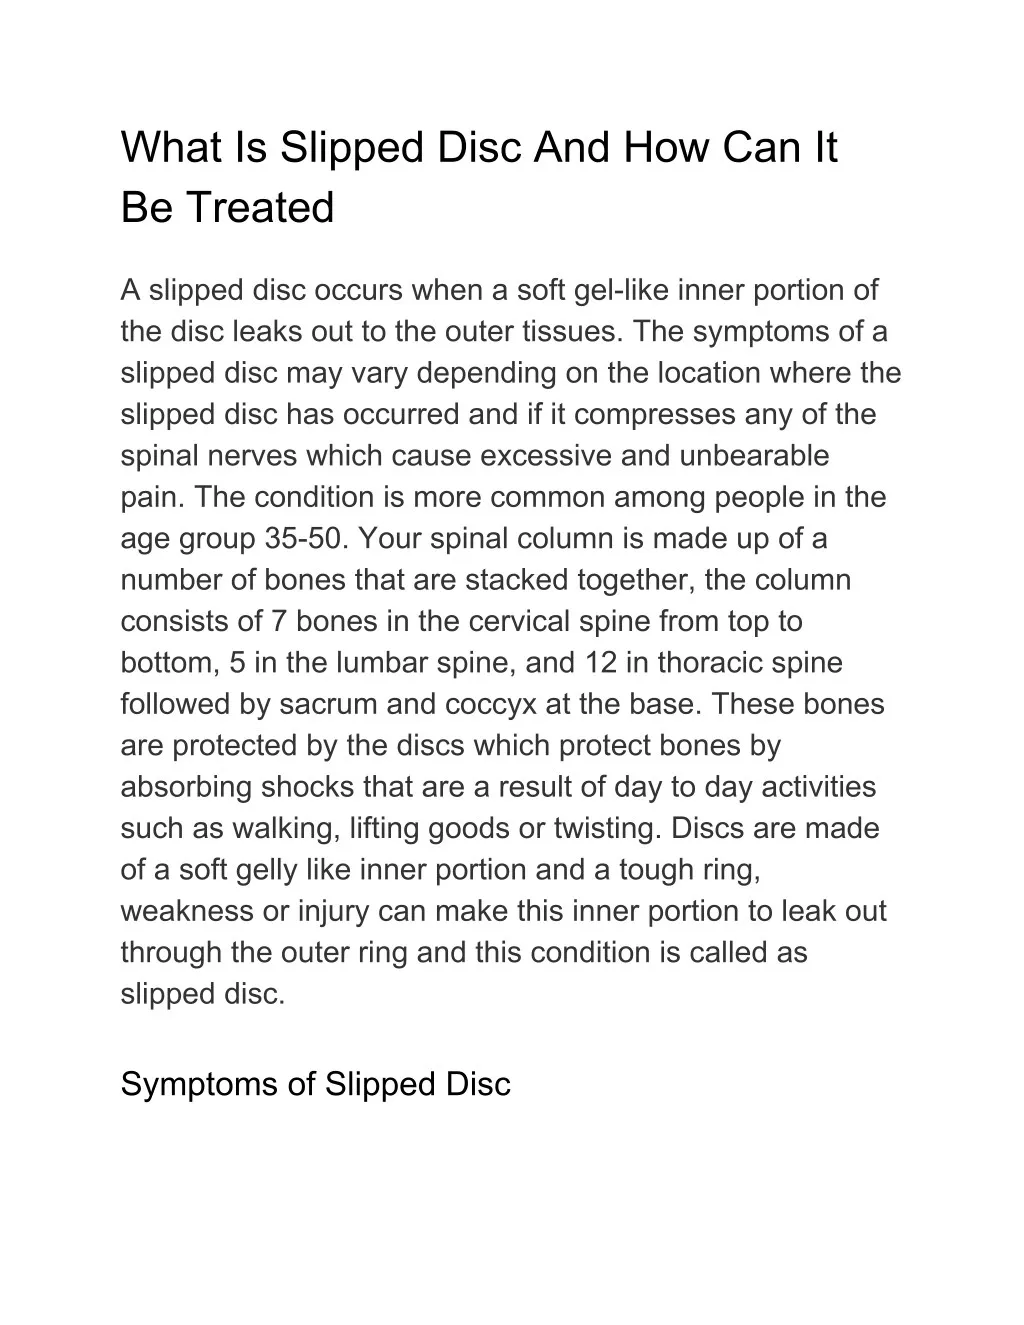 what is slipped disc and how can it be treated